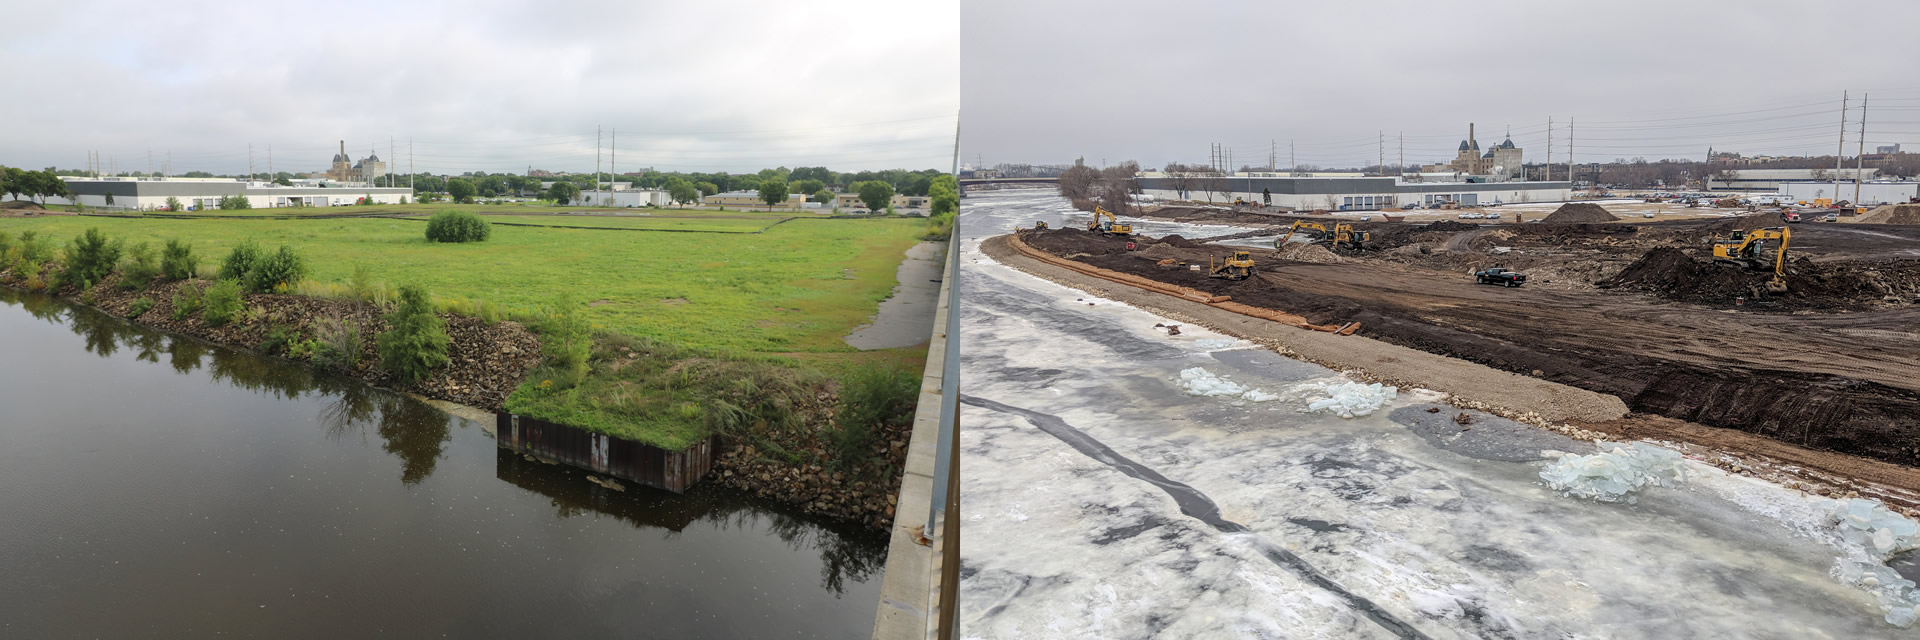 Hall's Island in August 2016 (left) and in January 2018 (right). 